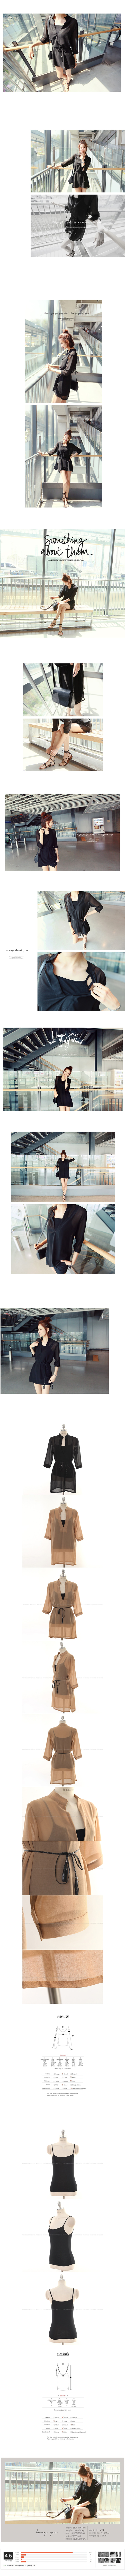 See-through Chiffon Blouse with Tank Top and Belt 3 Piece Set Black One Size(S-M) [New Arrival]